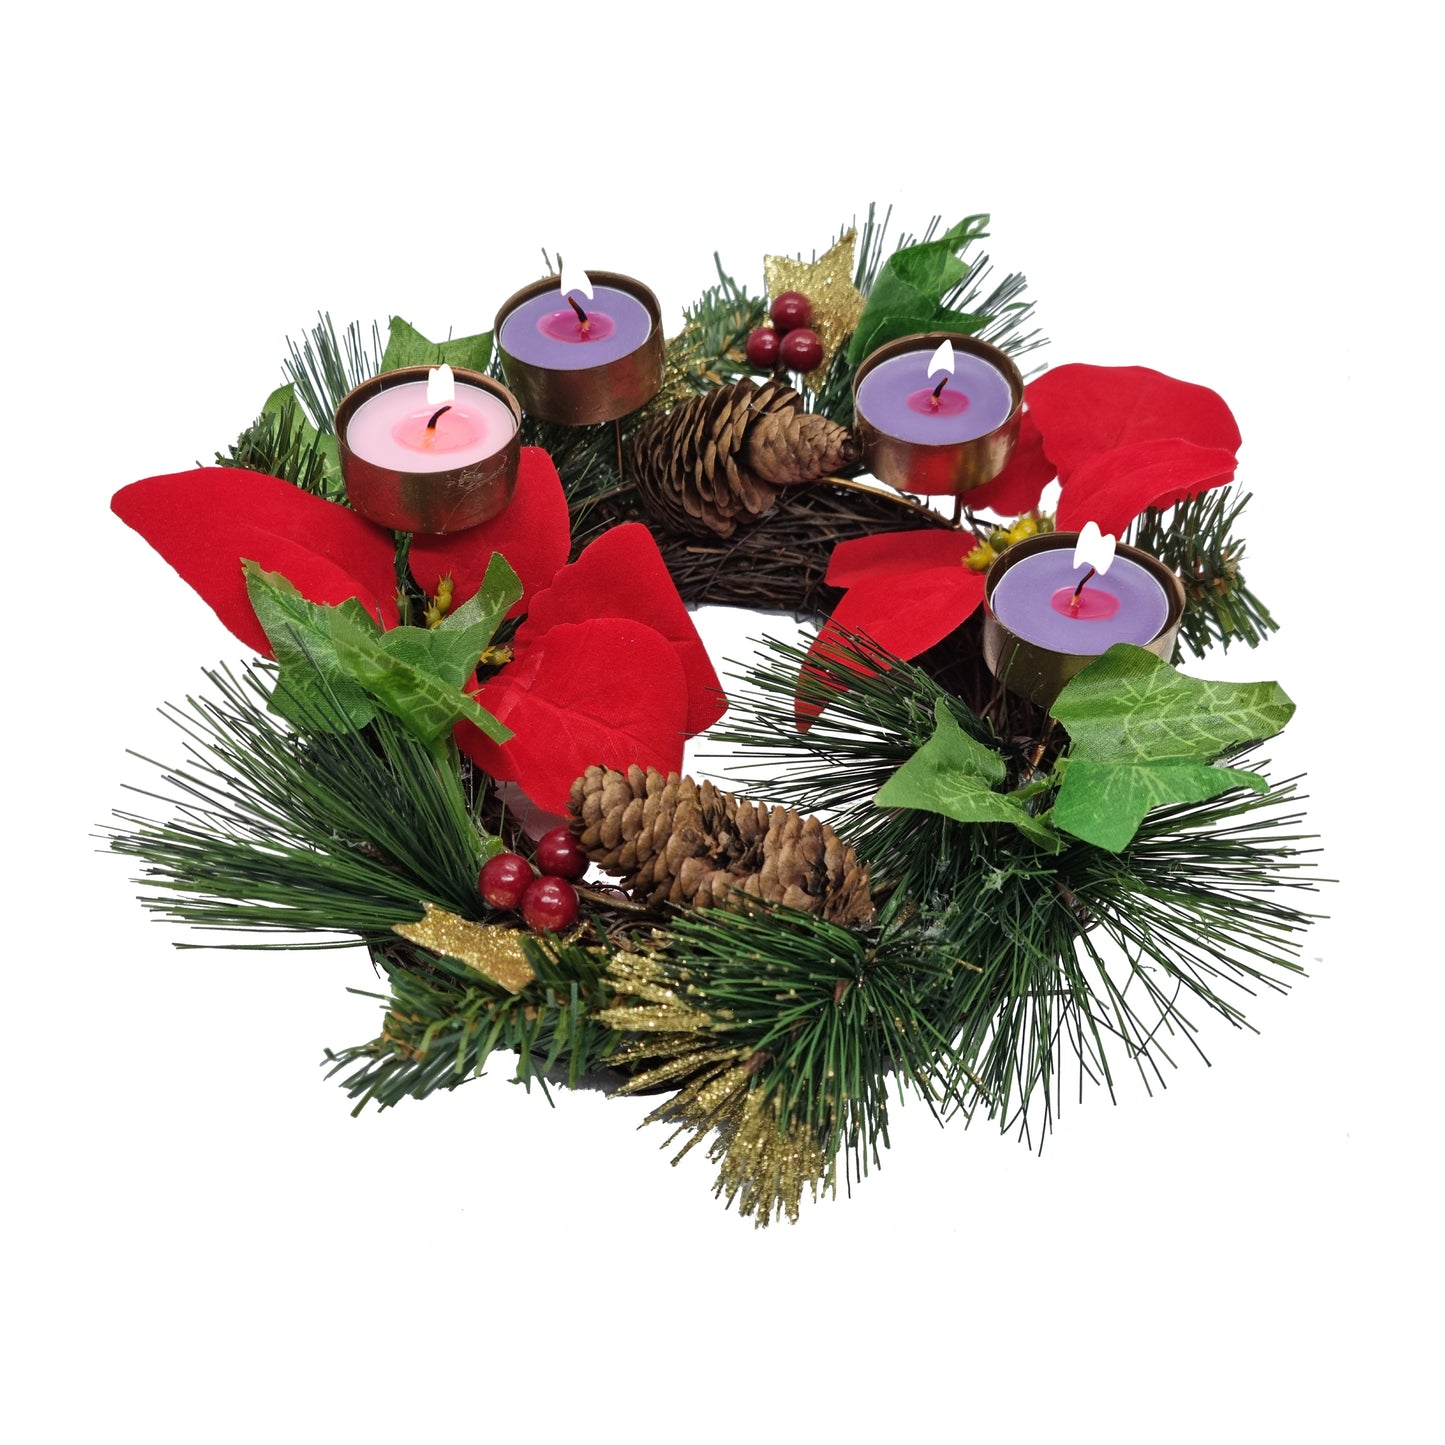 Advent Wreath – Small (12 Inch), With Tealight Candles